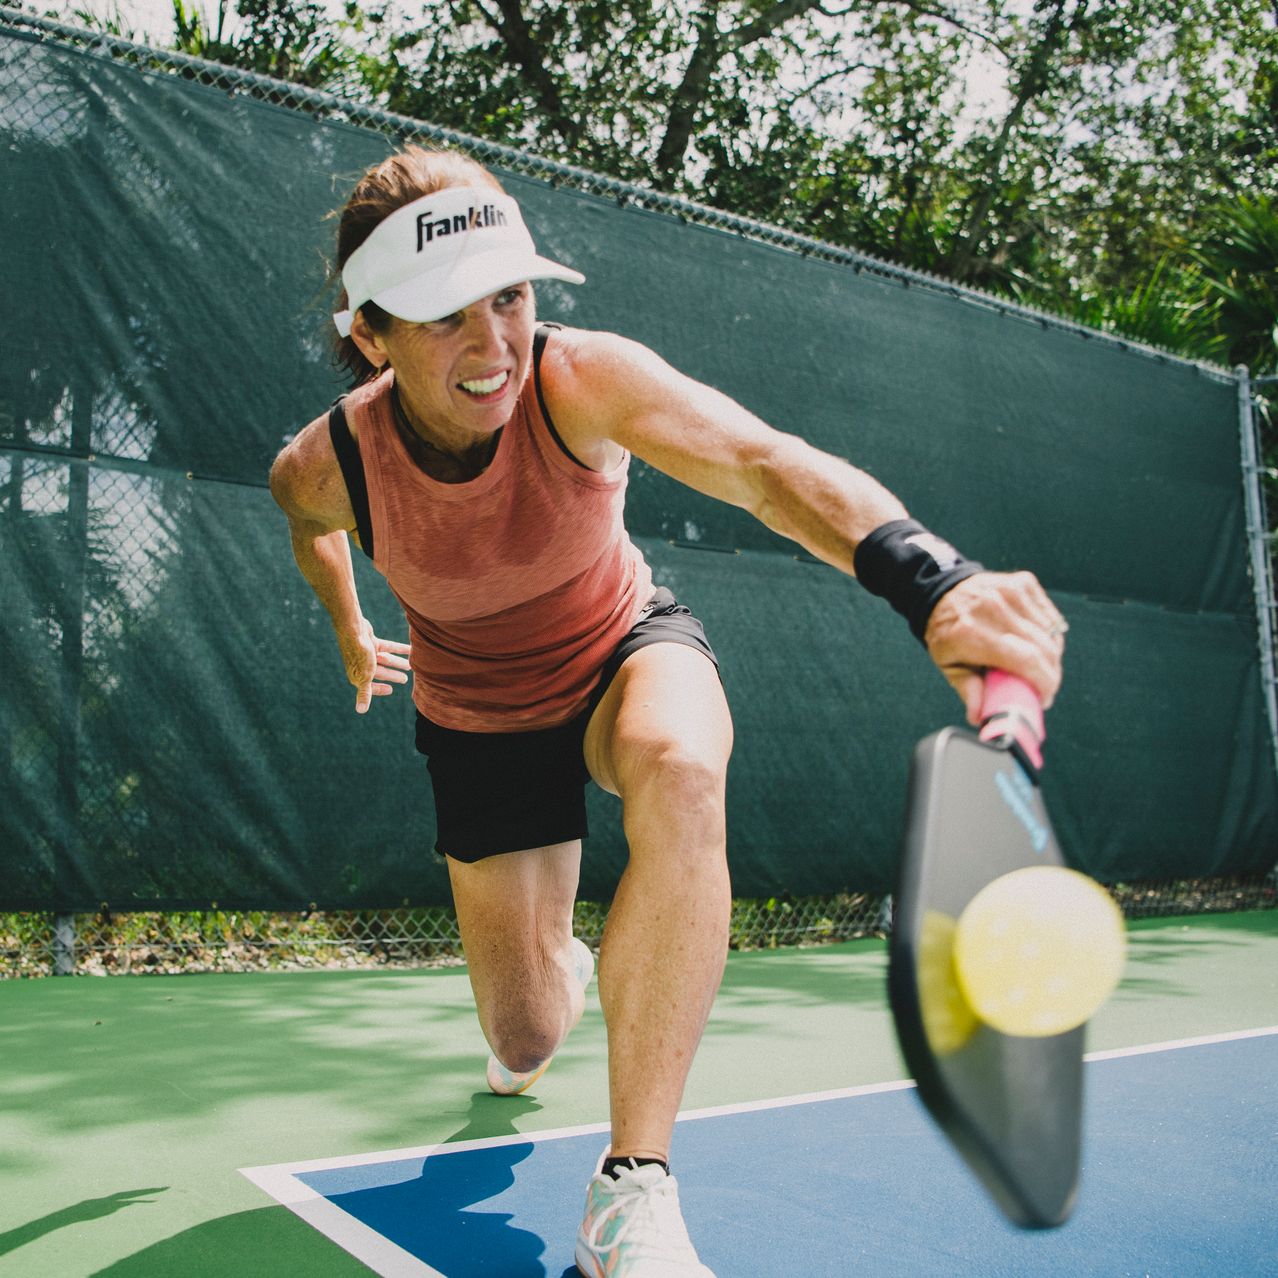 how do you score in pickleball